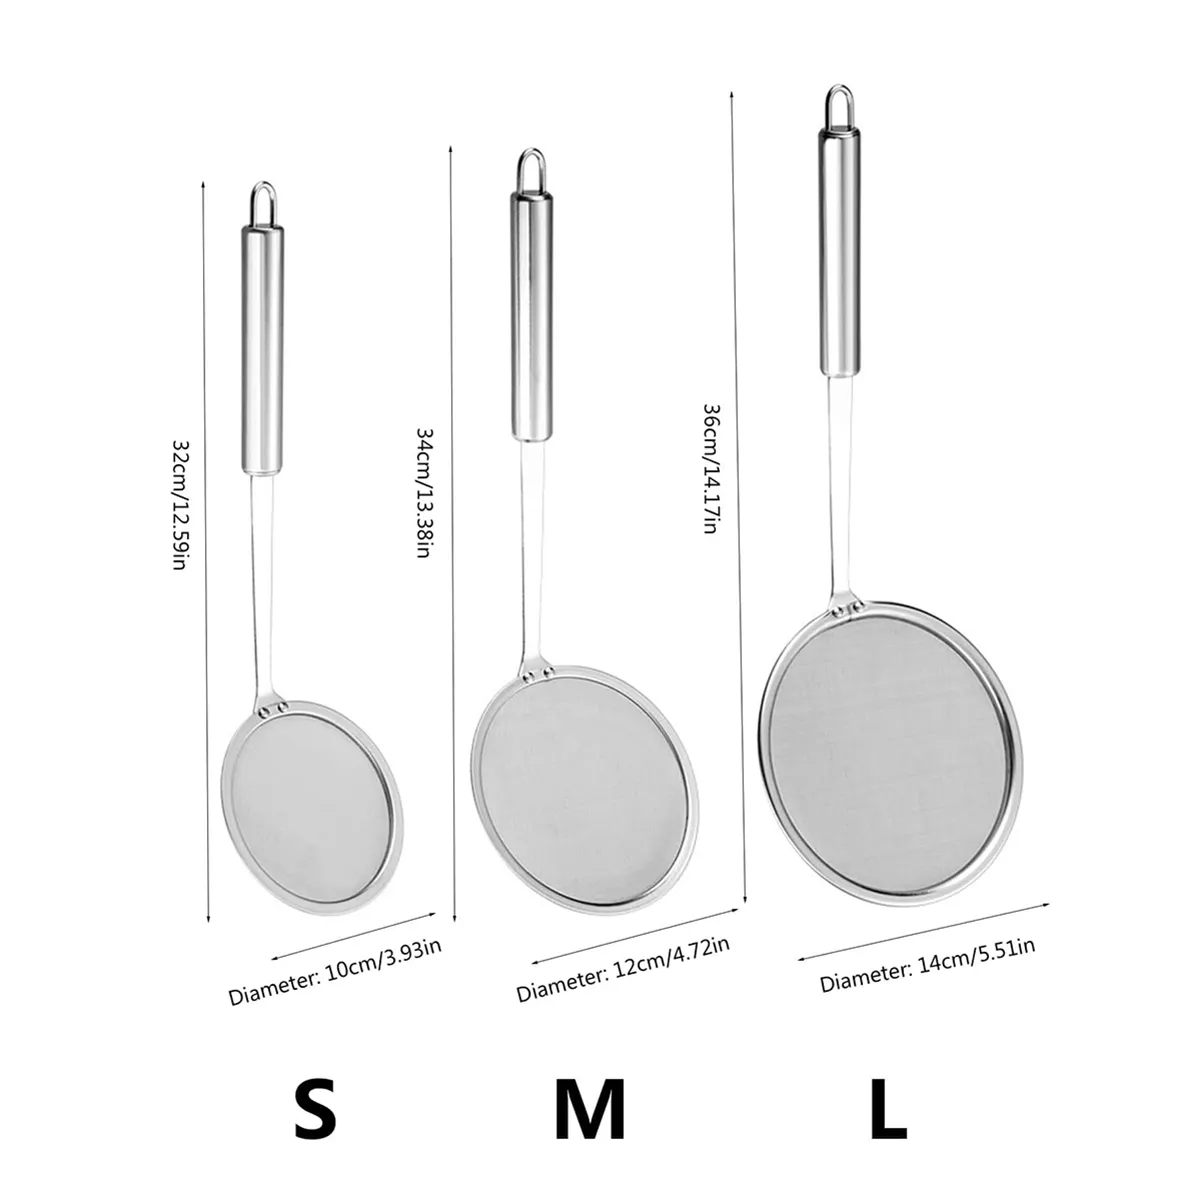 Stainless Steel Skimmer Ladle with Filter for Juicing, Soy Milk, Frying, and Foam Making